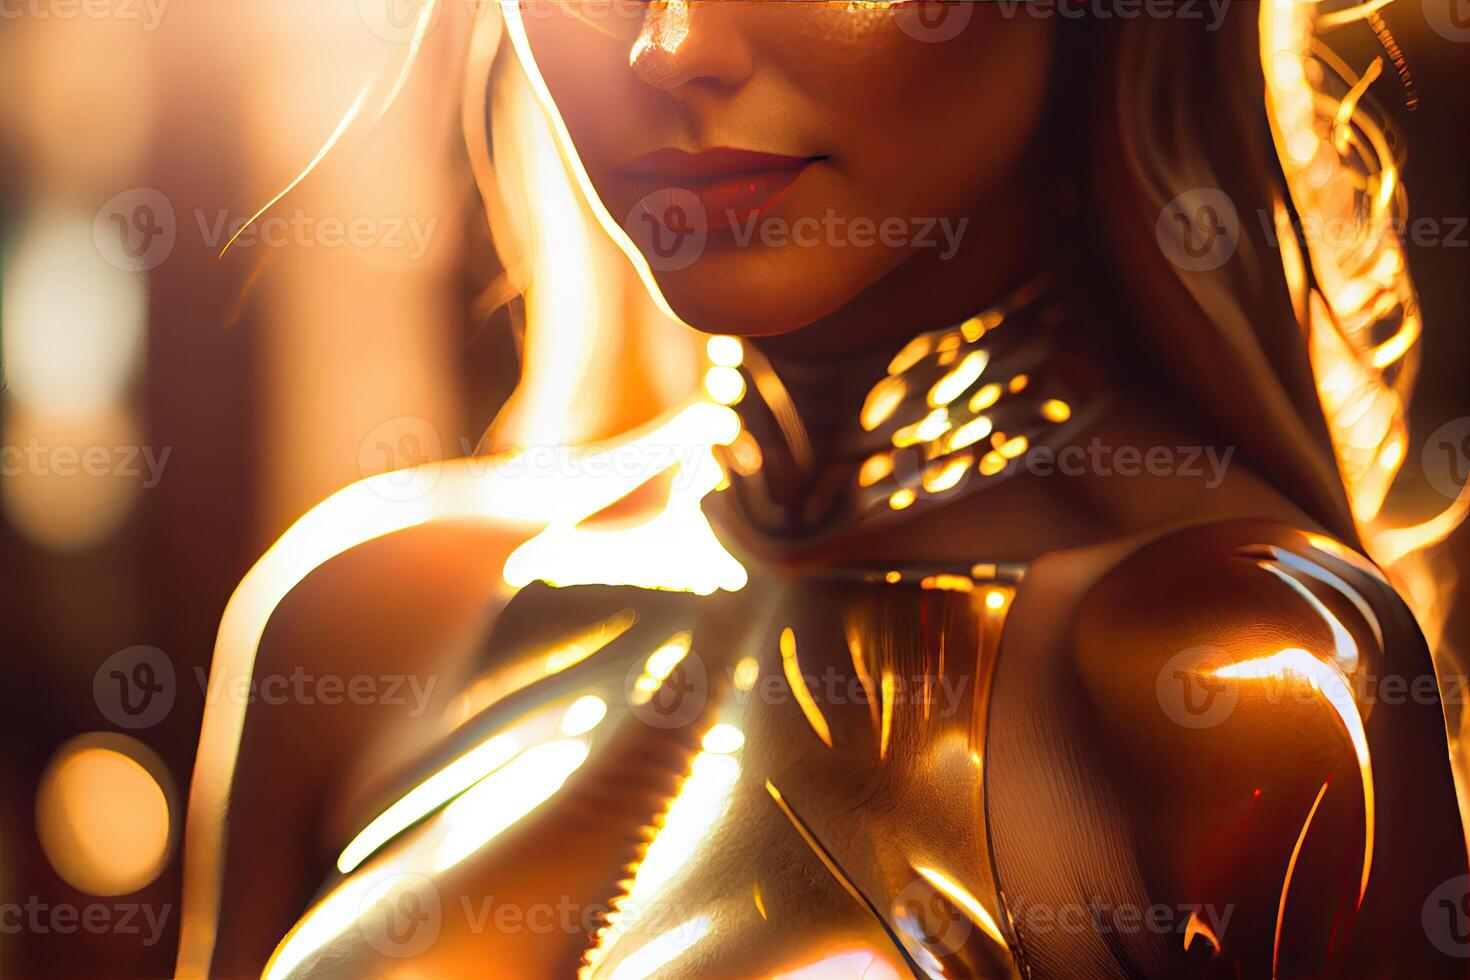 Golden female body, gold armour on woman, shiny light background, photo